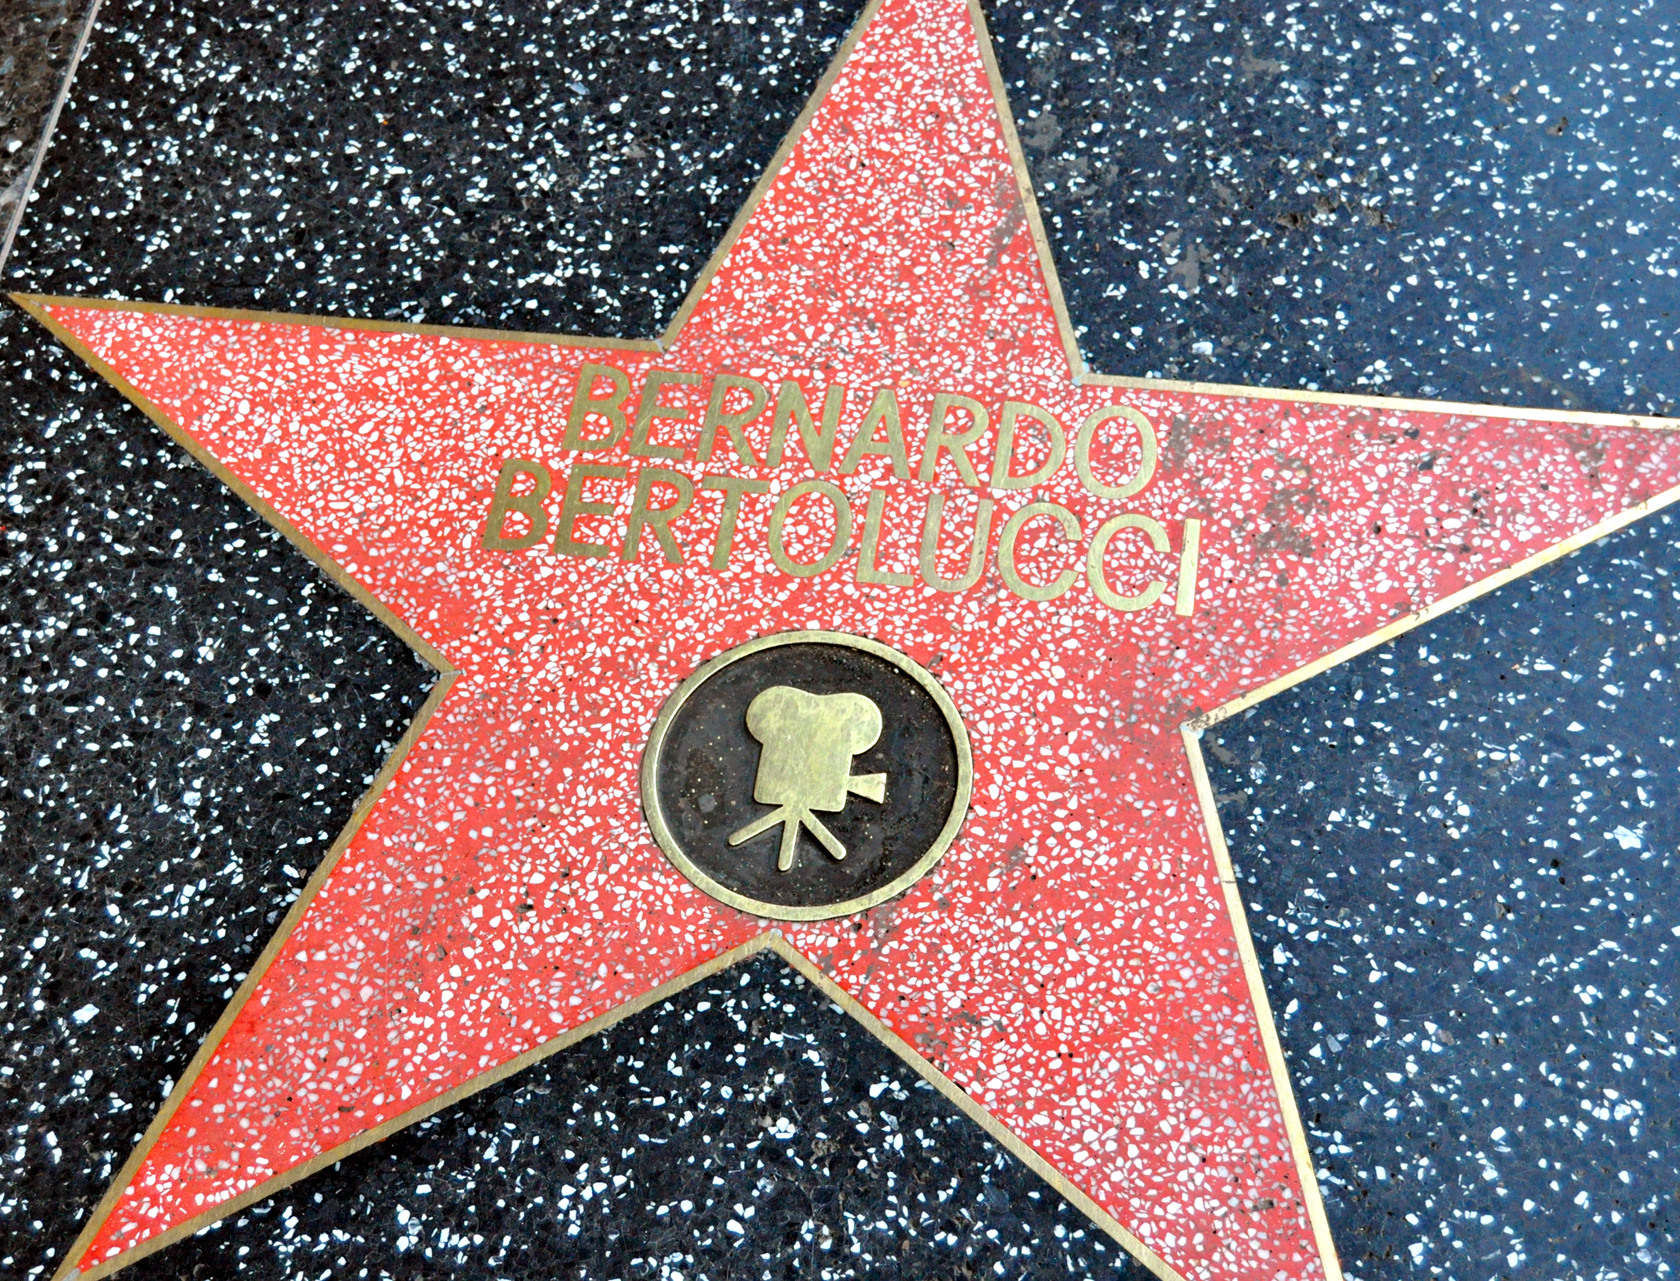 Wikipedia, Bernardo Bertolucci, Flickr images reviewed by trusted users, Hollywood Walk of Fame star